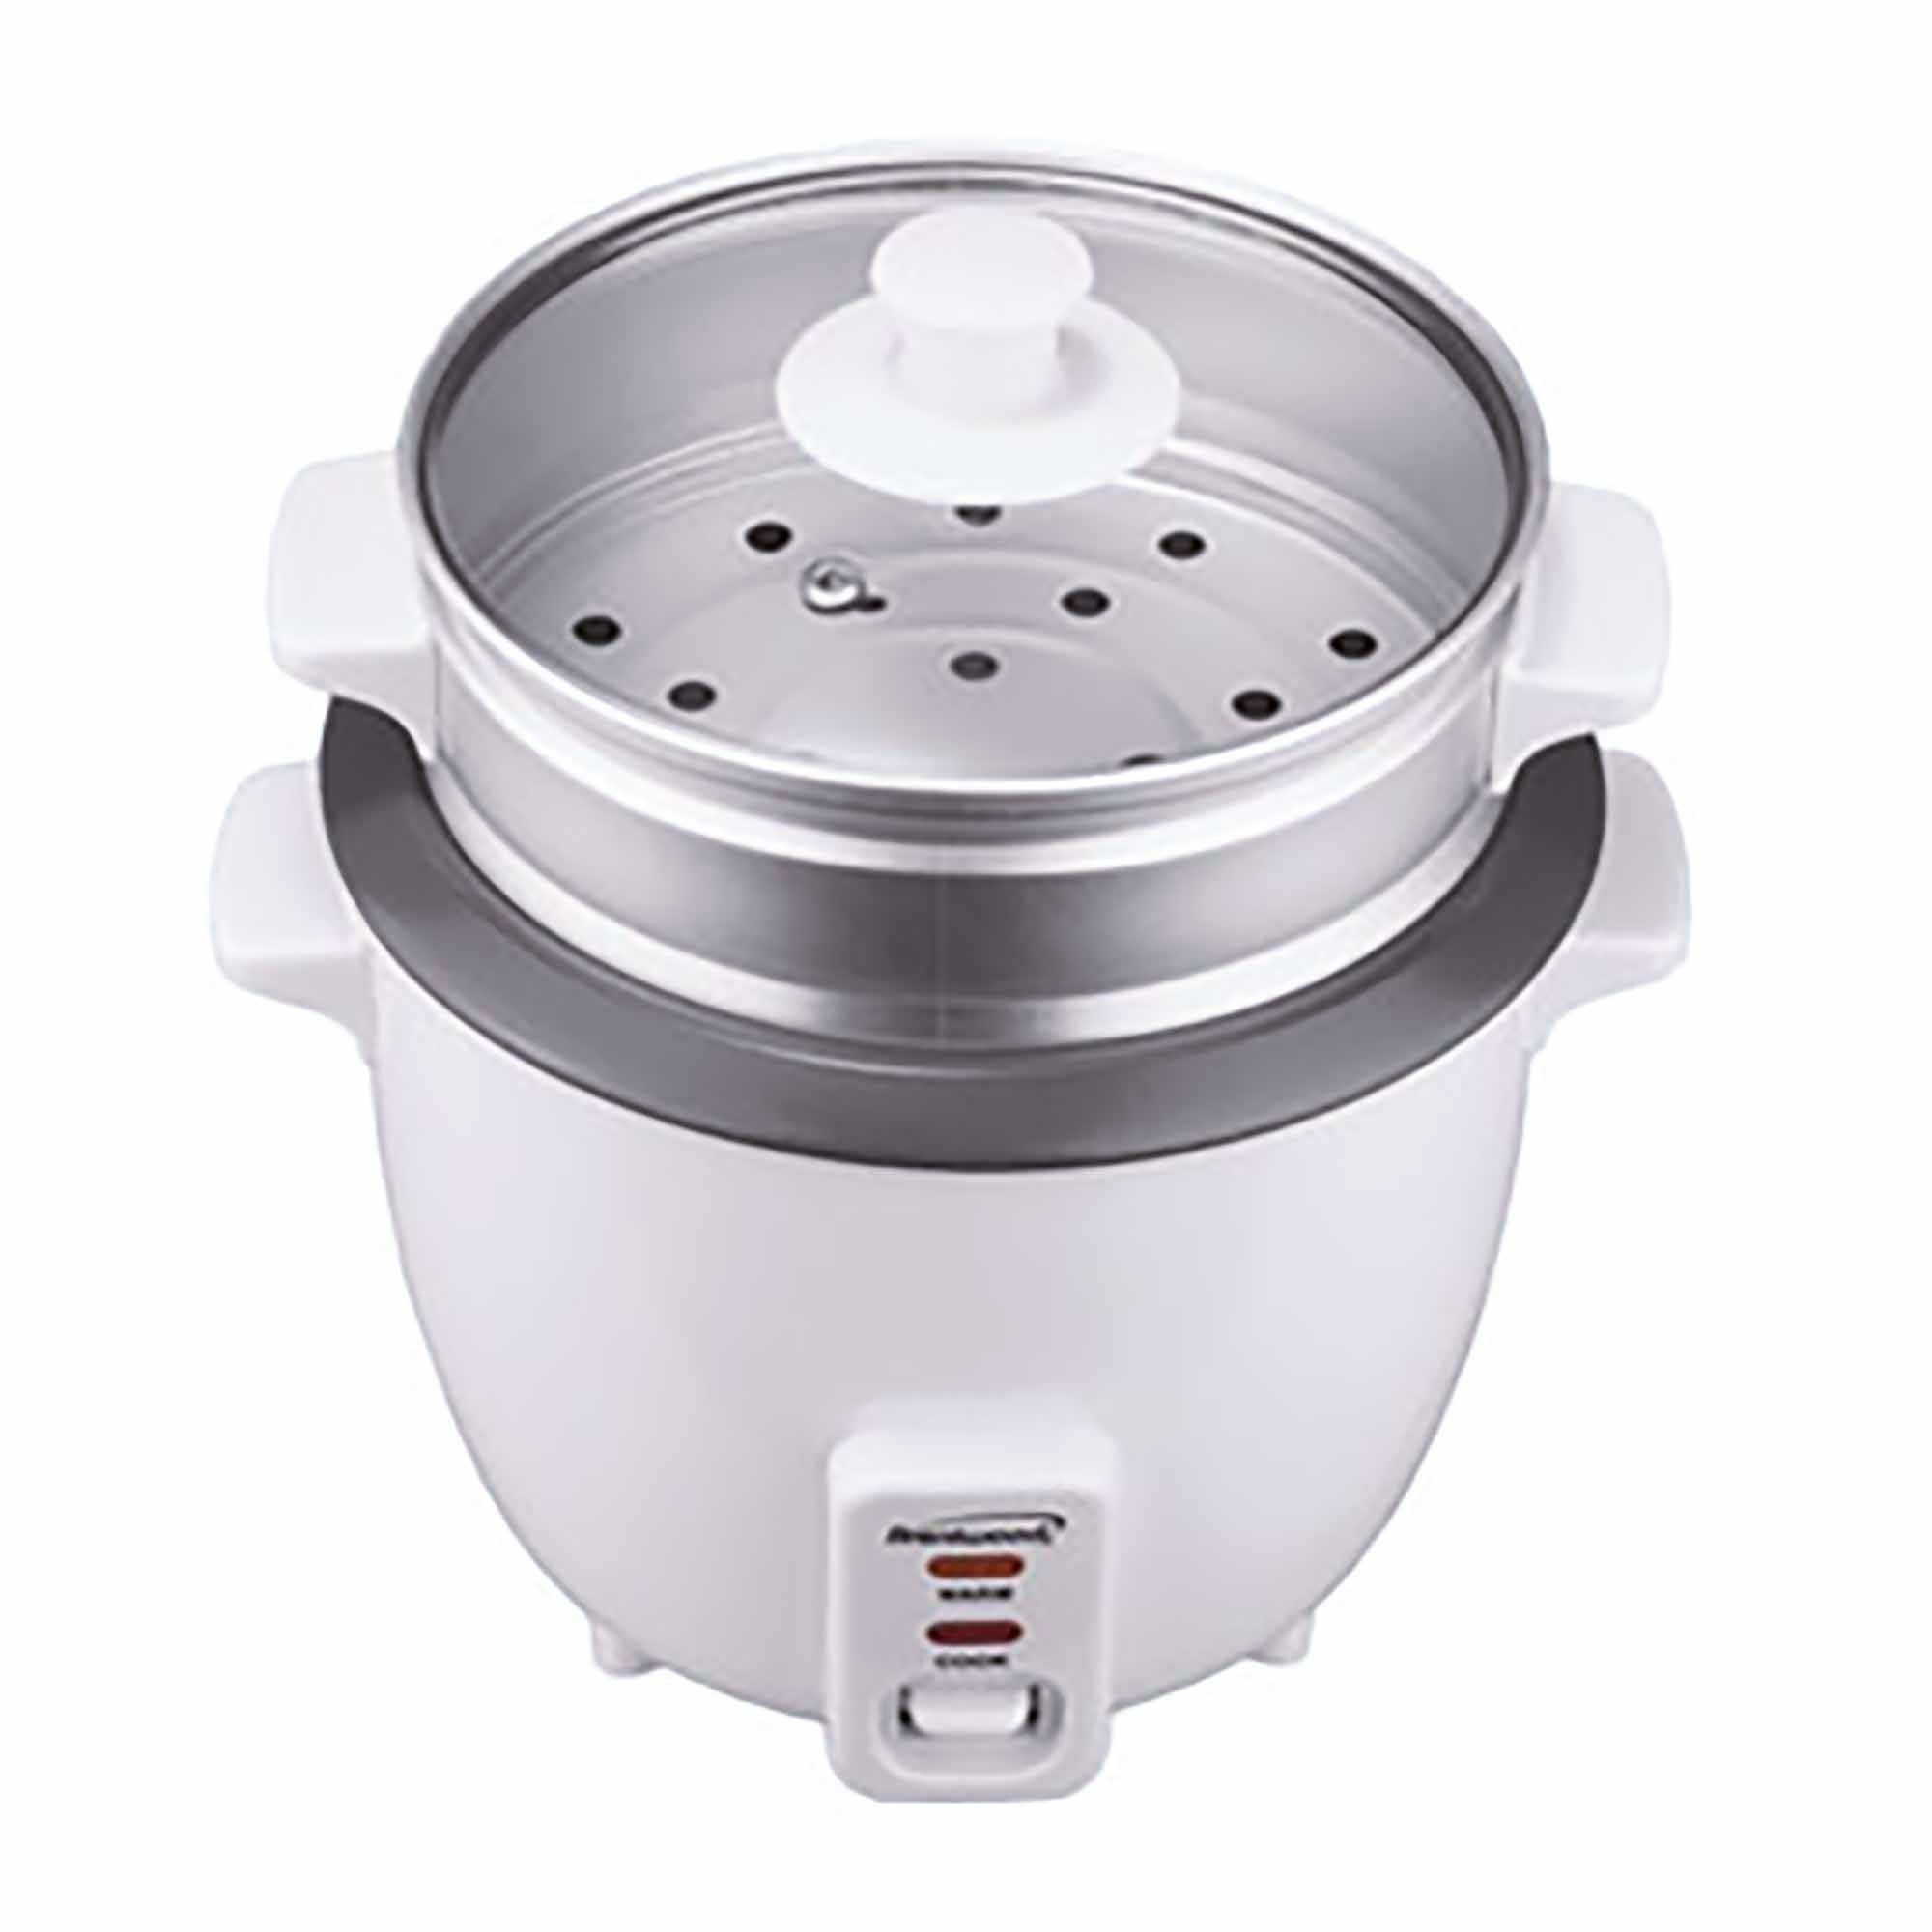 16-Cup Cooked (8 Uncooked) Electric Rice Cooker with Removable Nonstic